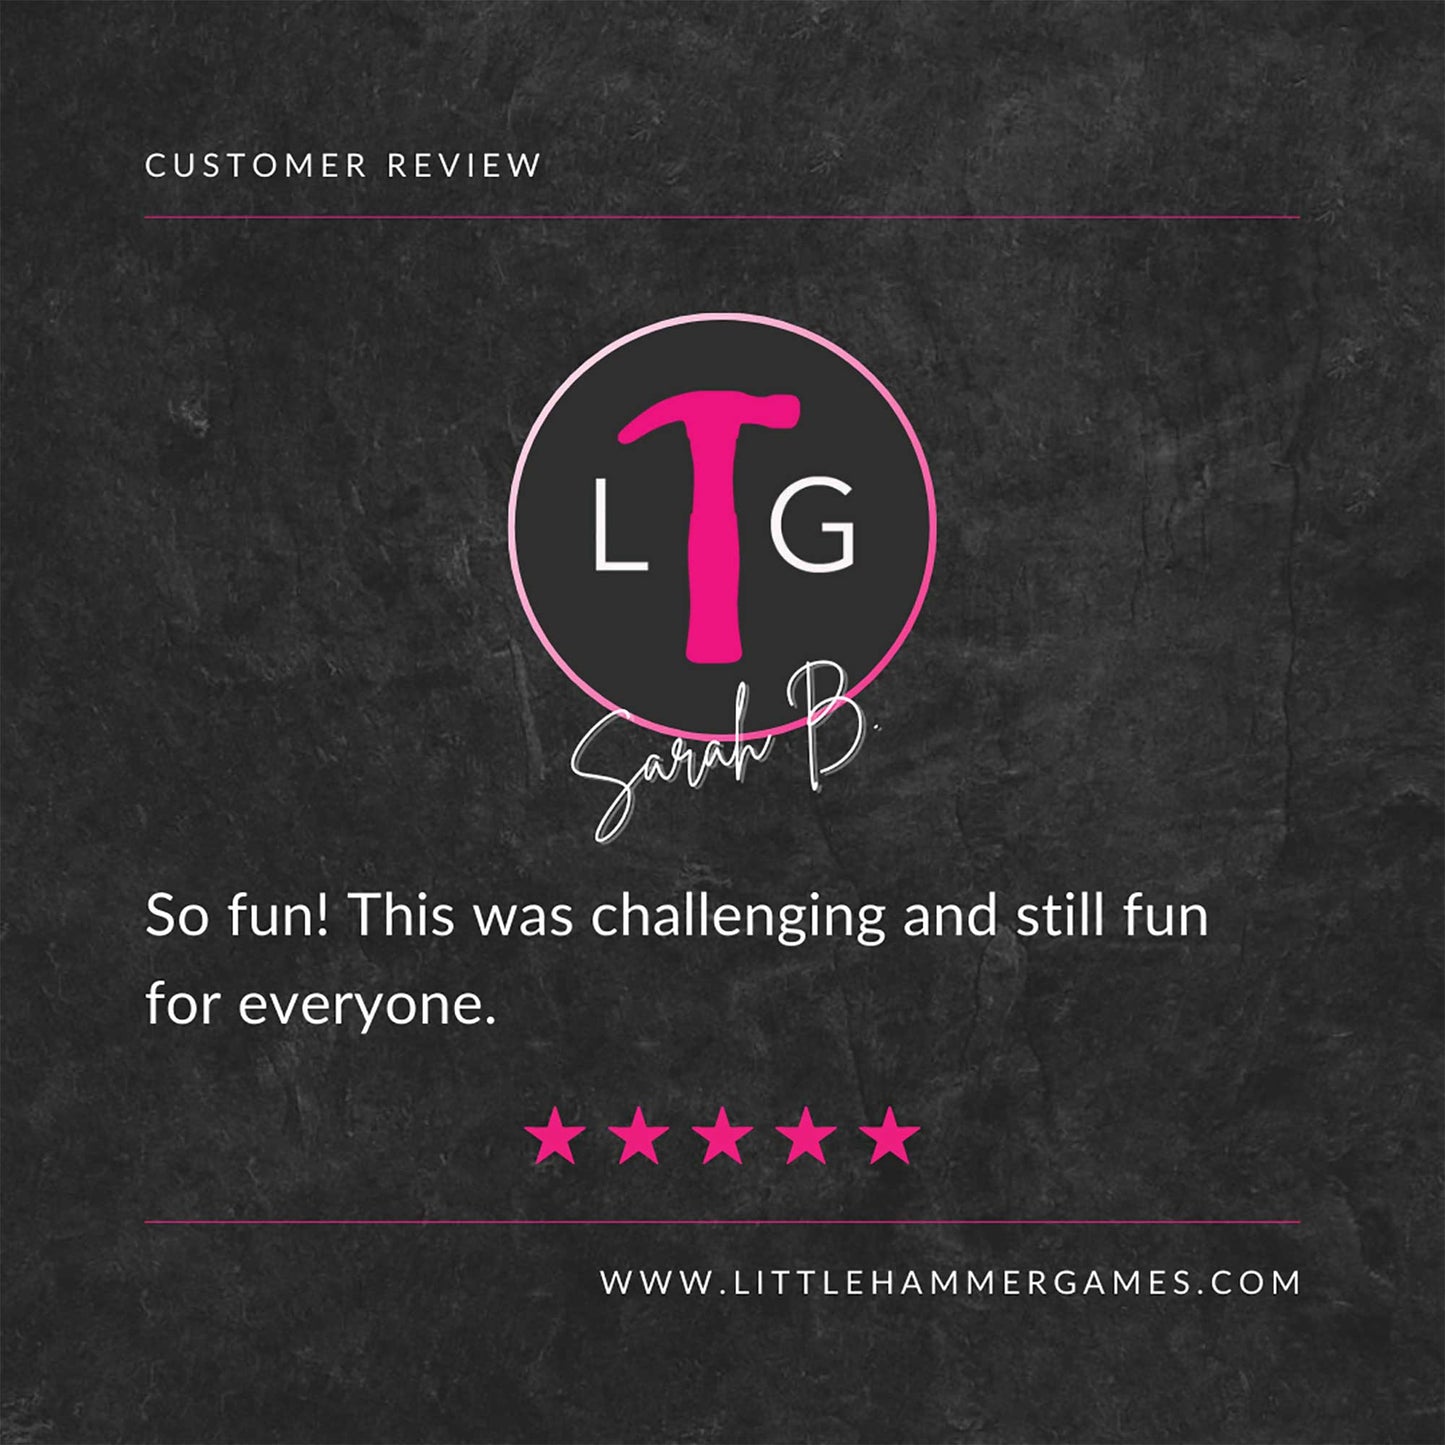 Pink and white text on a slate background that shows a 5-star review from Sarah B. that says "So fun! This was challenging and still fun for everyone."